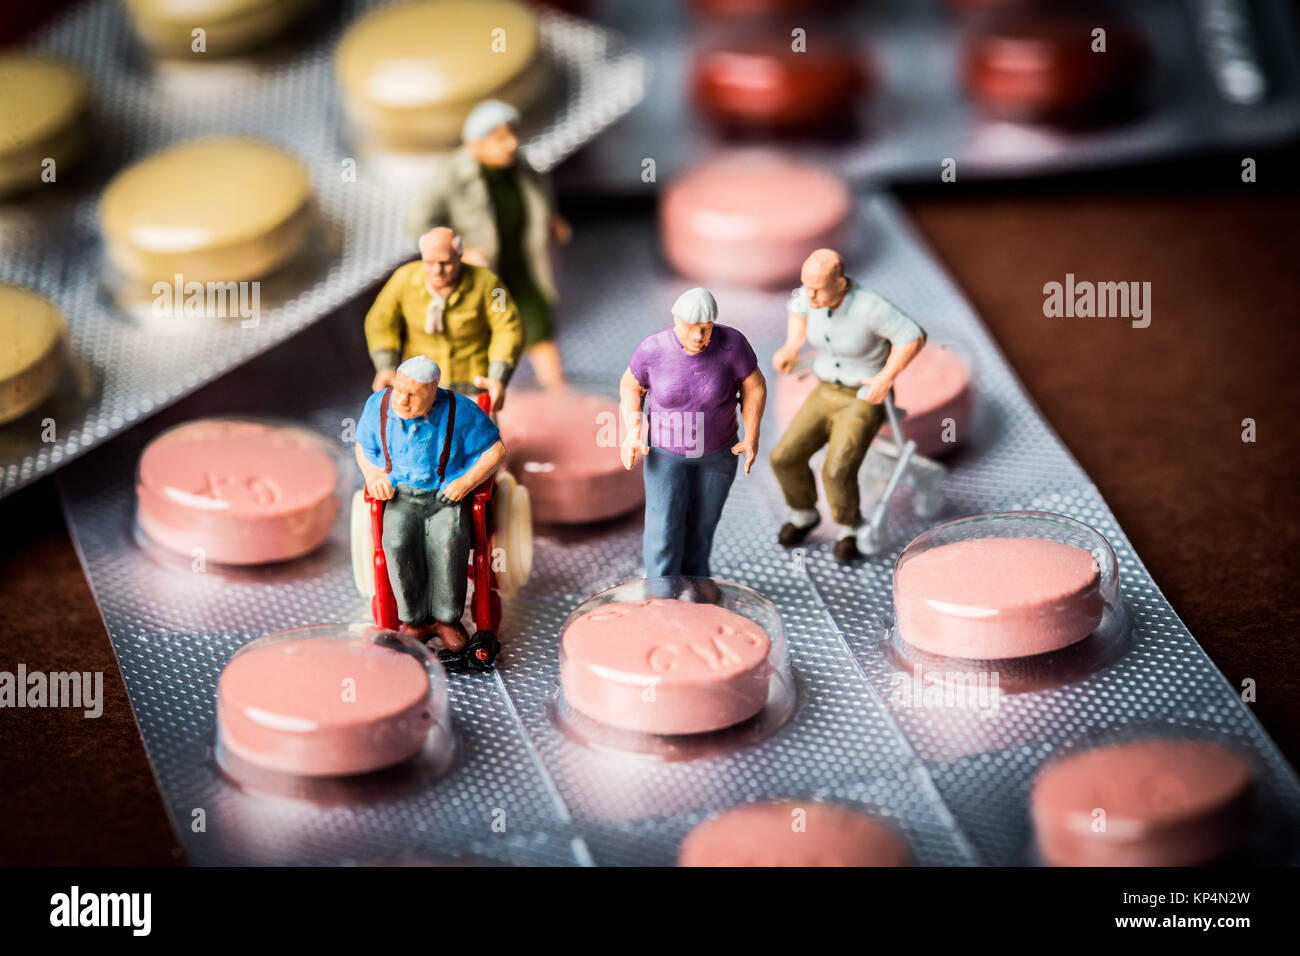 Conceptual image on medication use by the elderly personn. Stock Photo